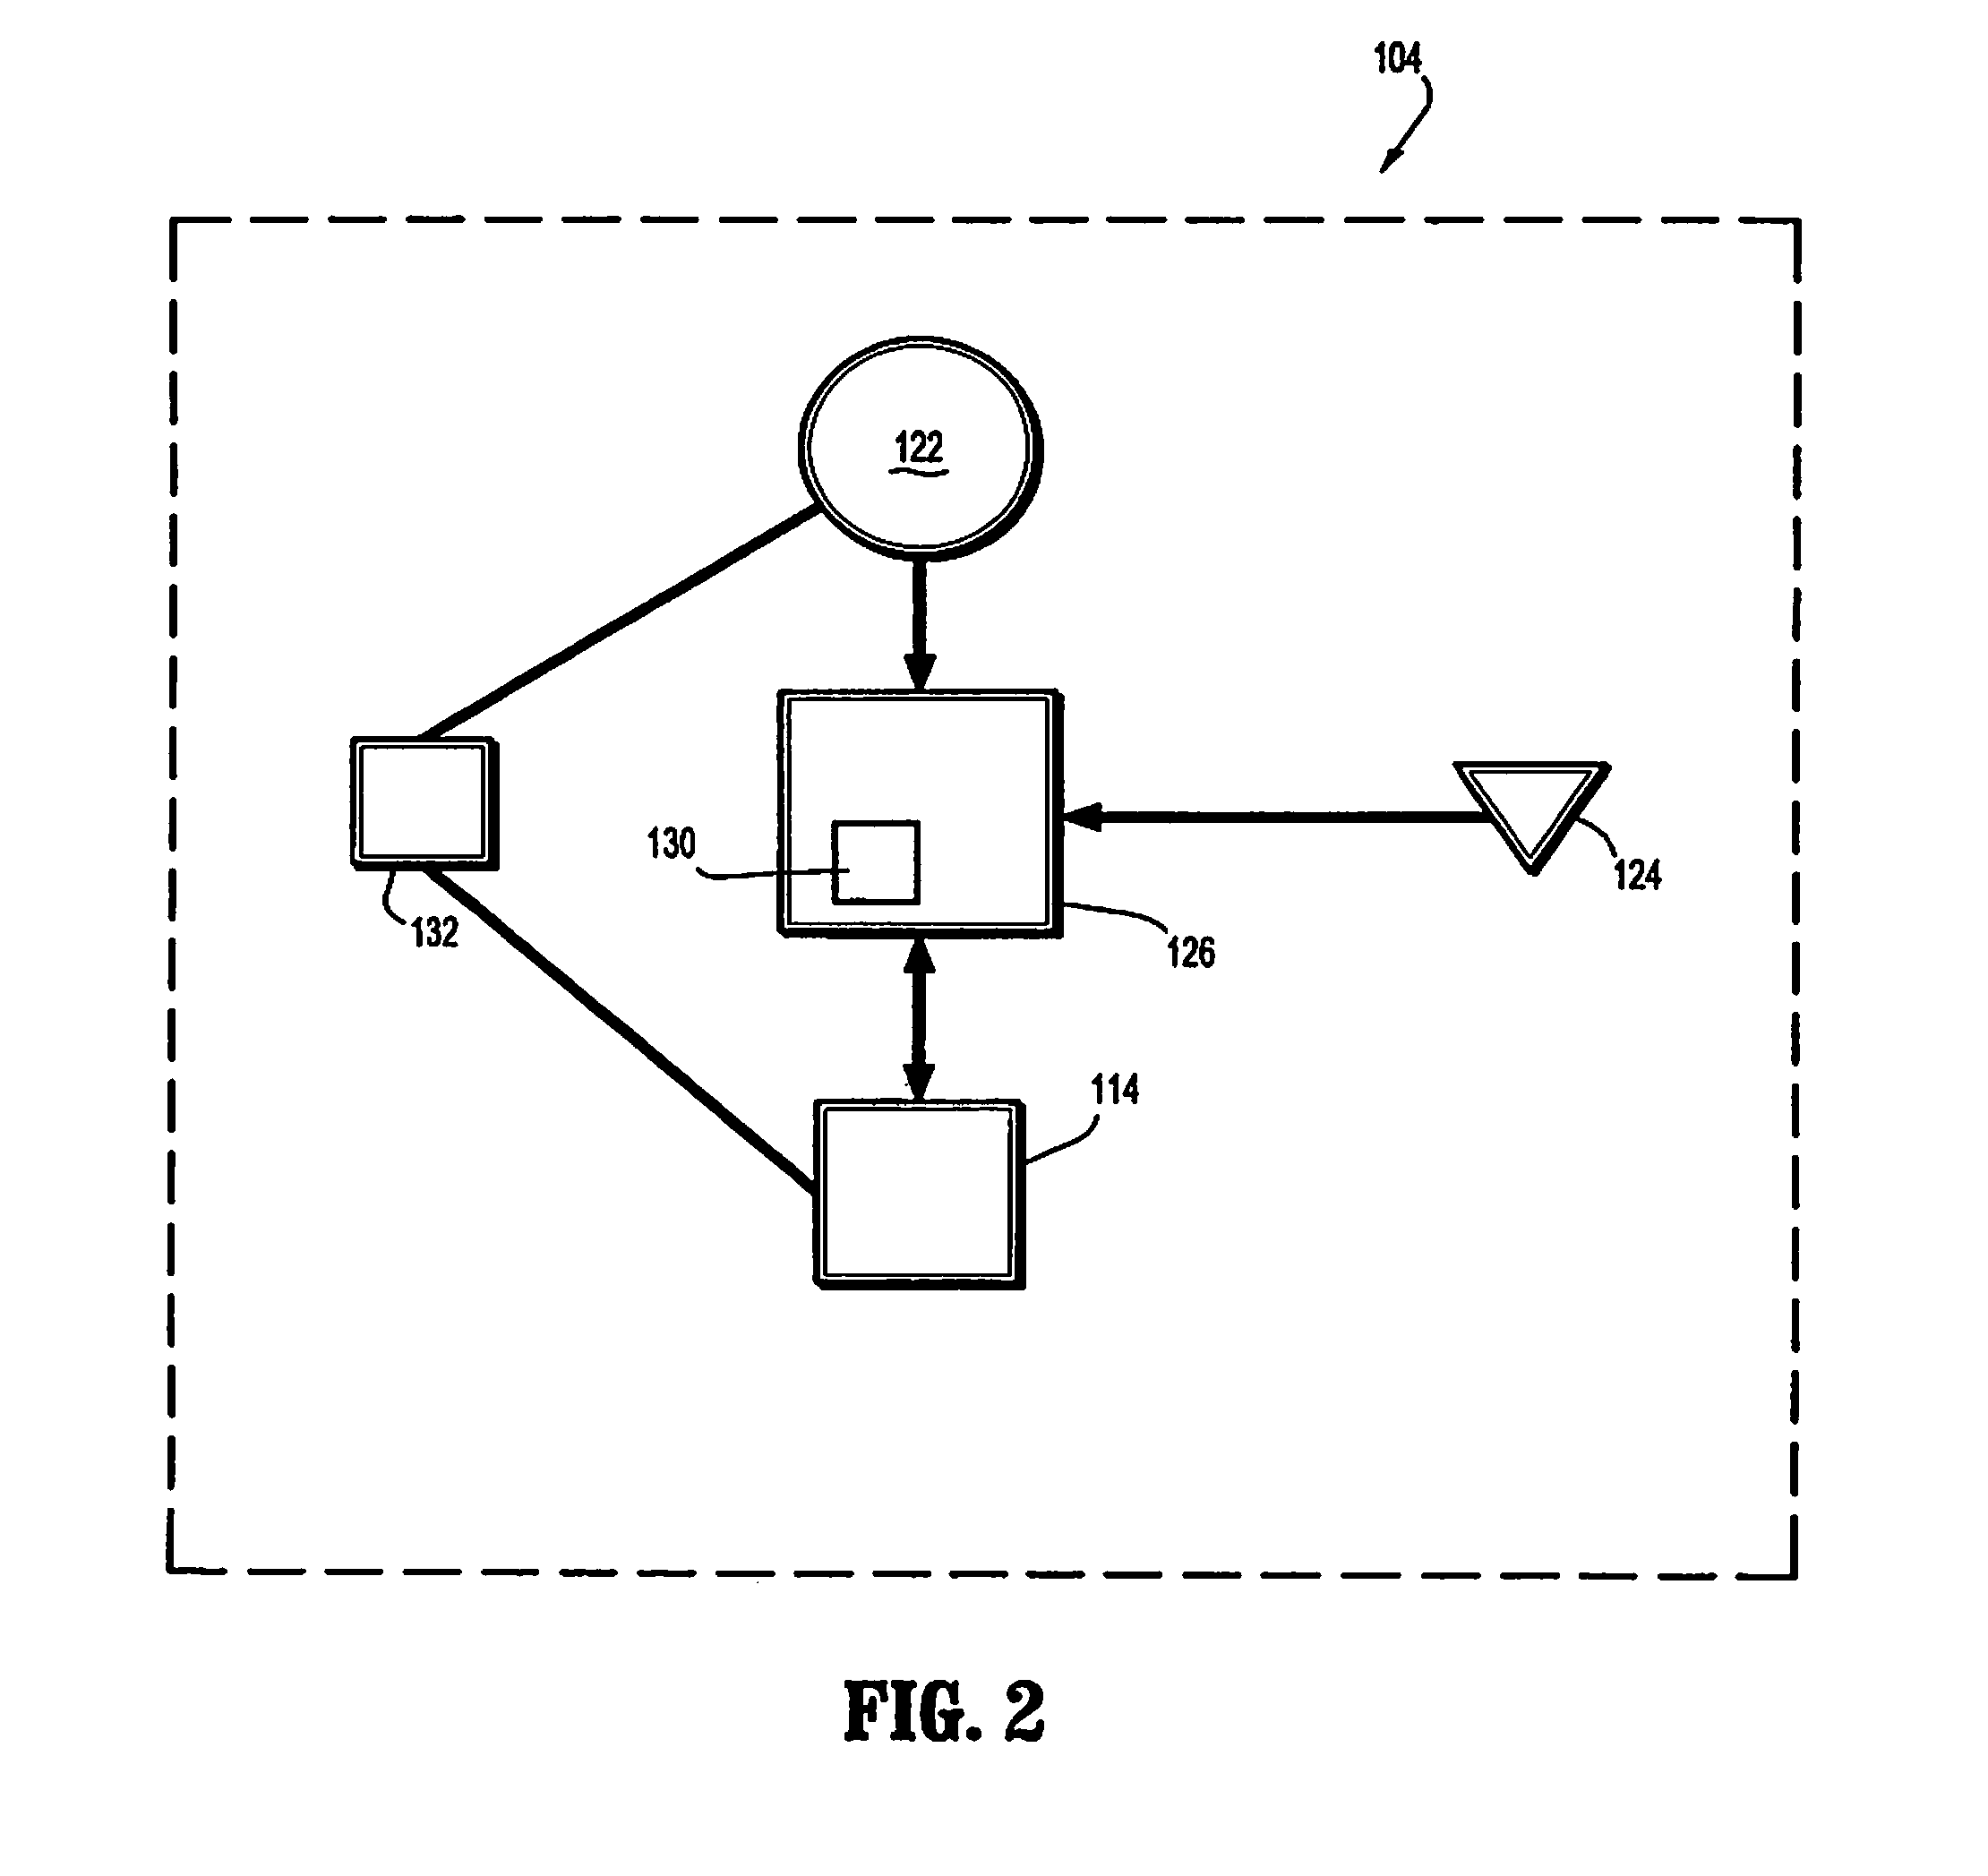 Self contained wound dressing apparatus